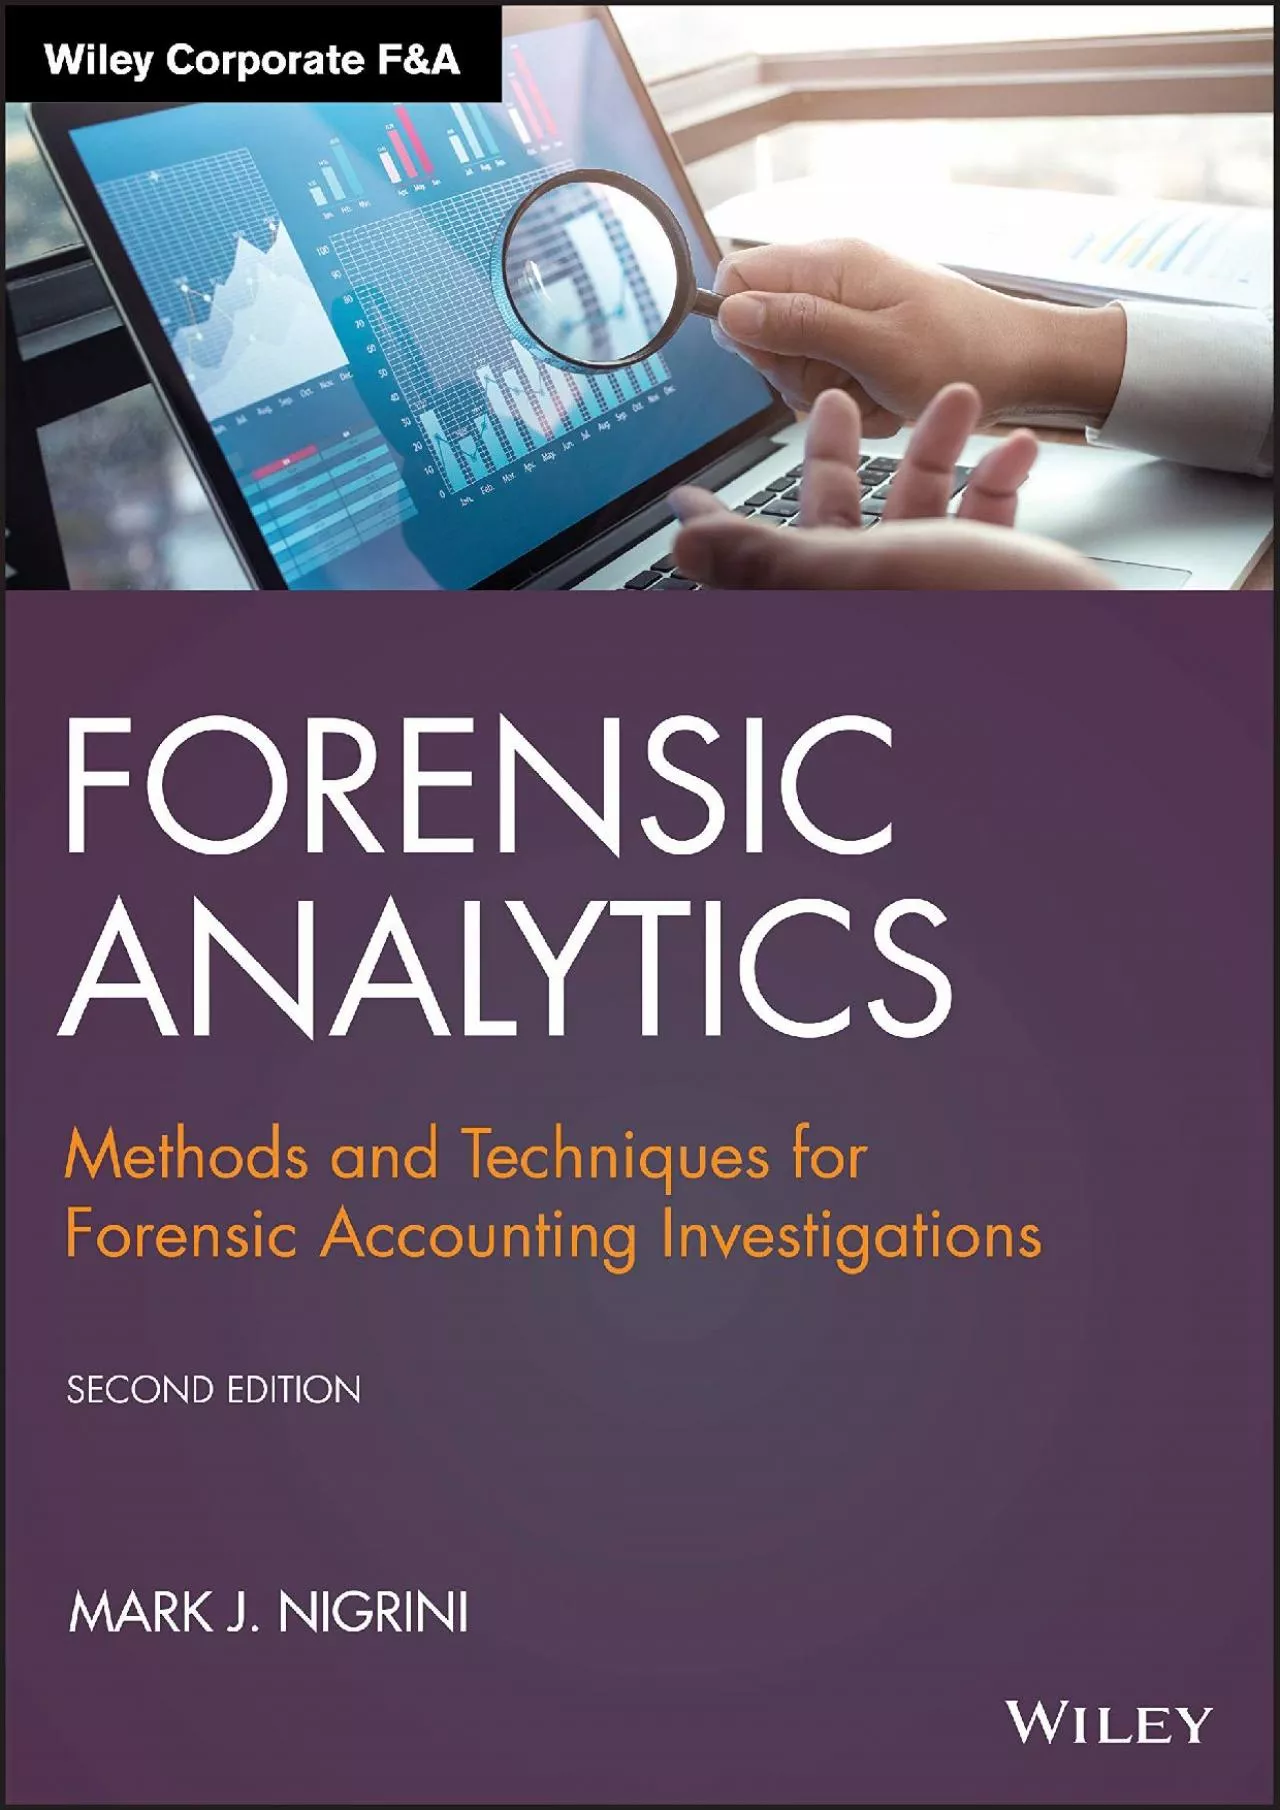 (BOOS)-Forensic Analytics: Methods and Techniques for Forensic Accounting Investigations